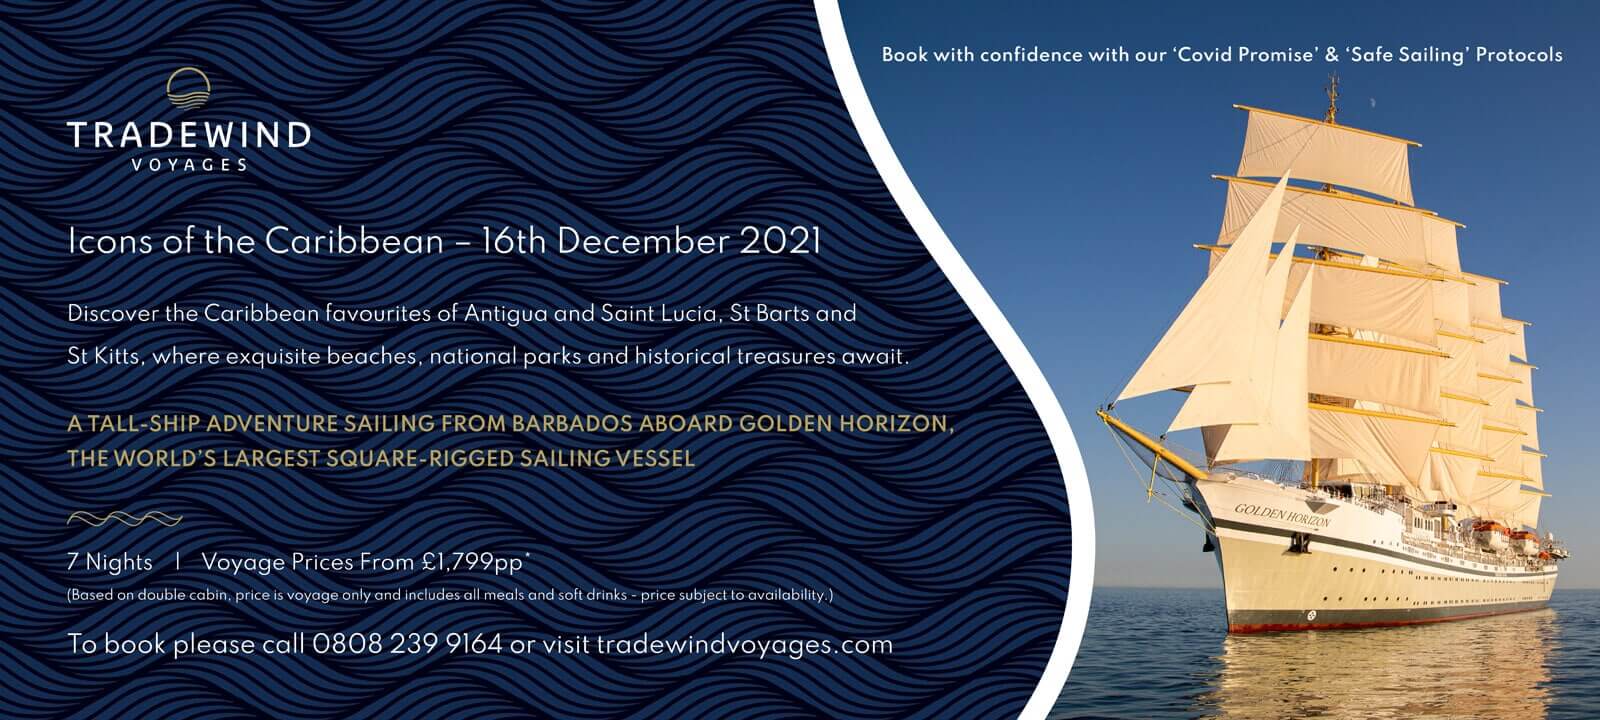 Tradewind Voyages Icons of the Caribbean